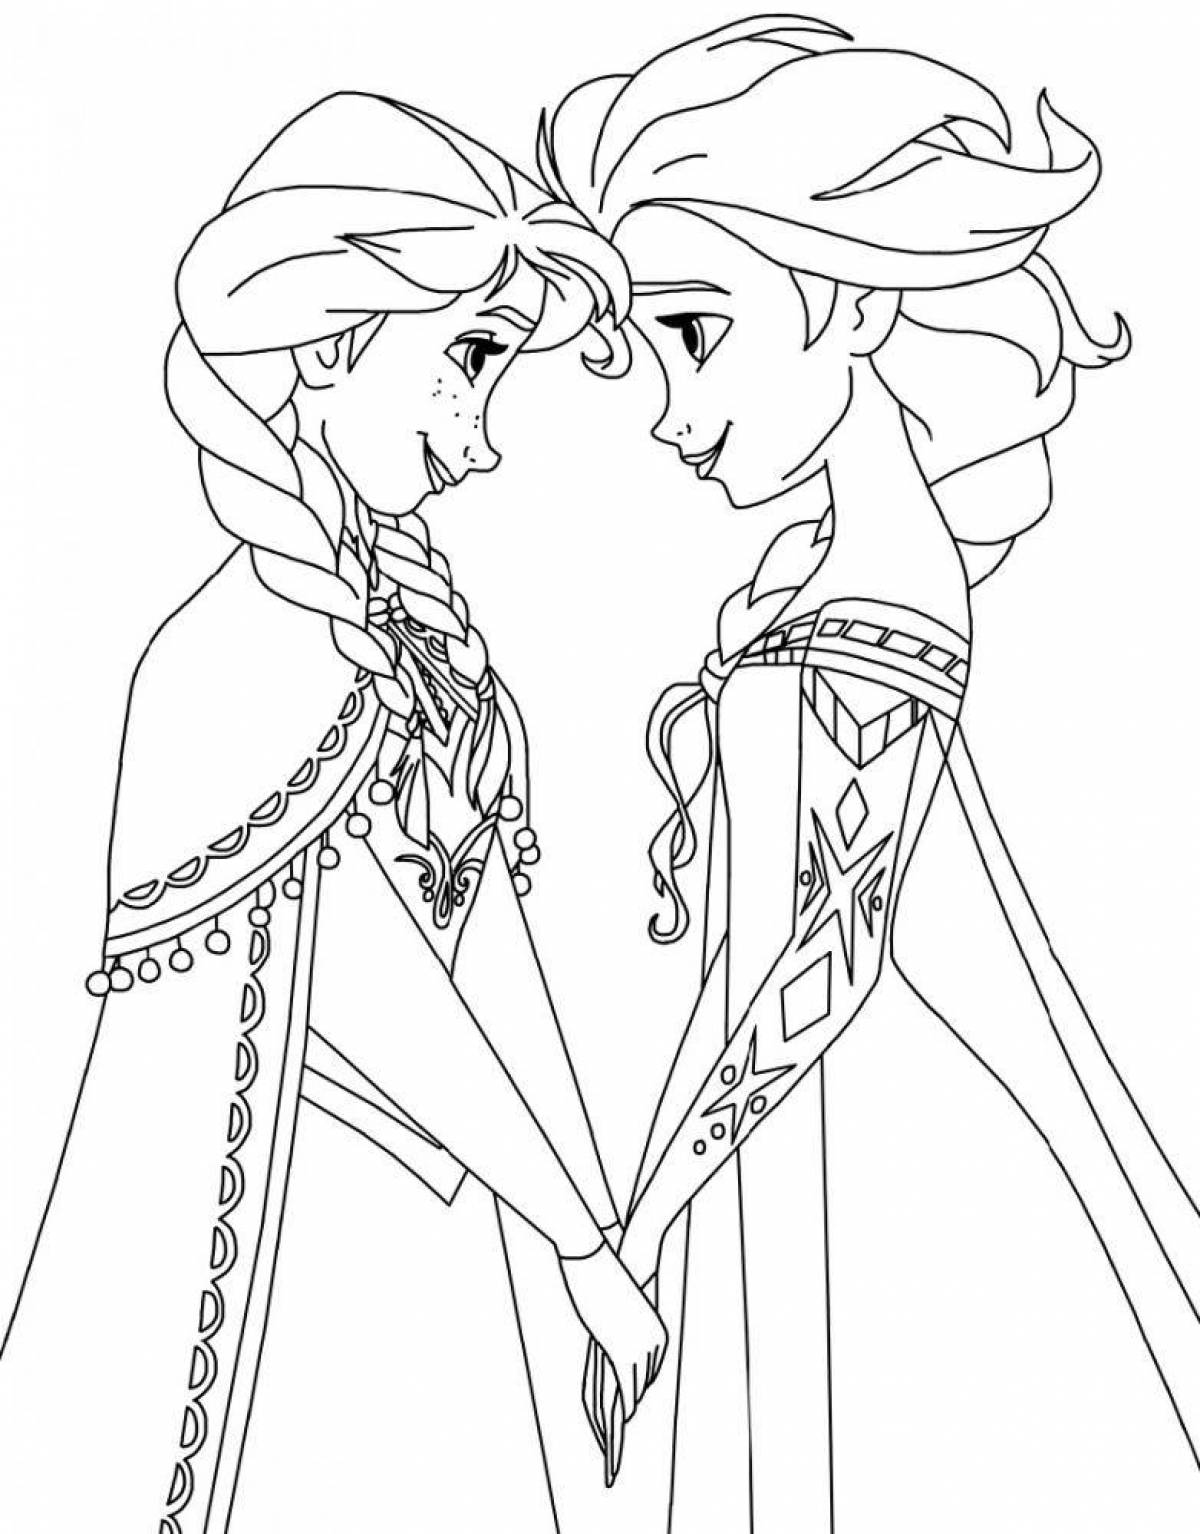 Bright cold heart coloring pages for children 5-6 years old